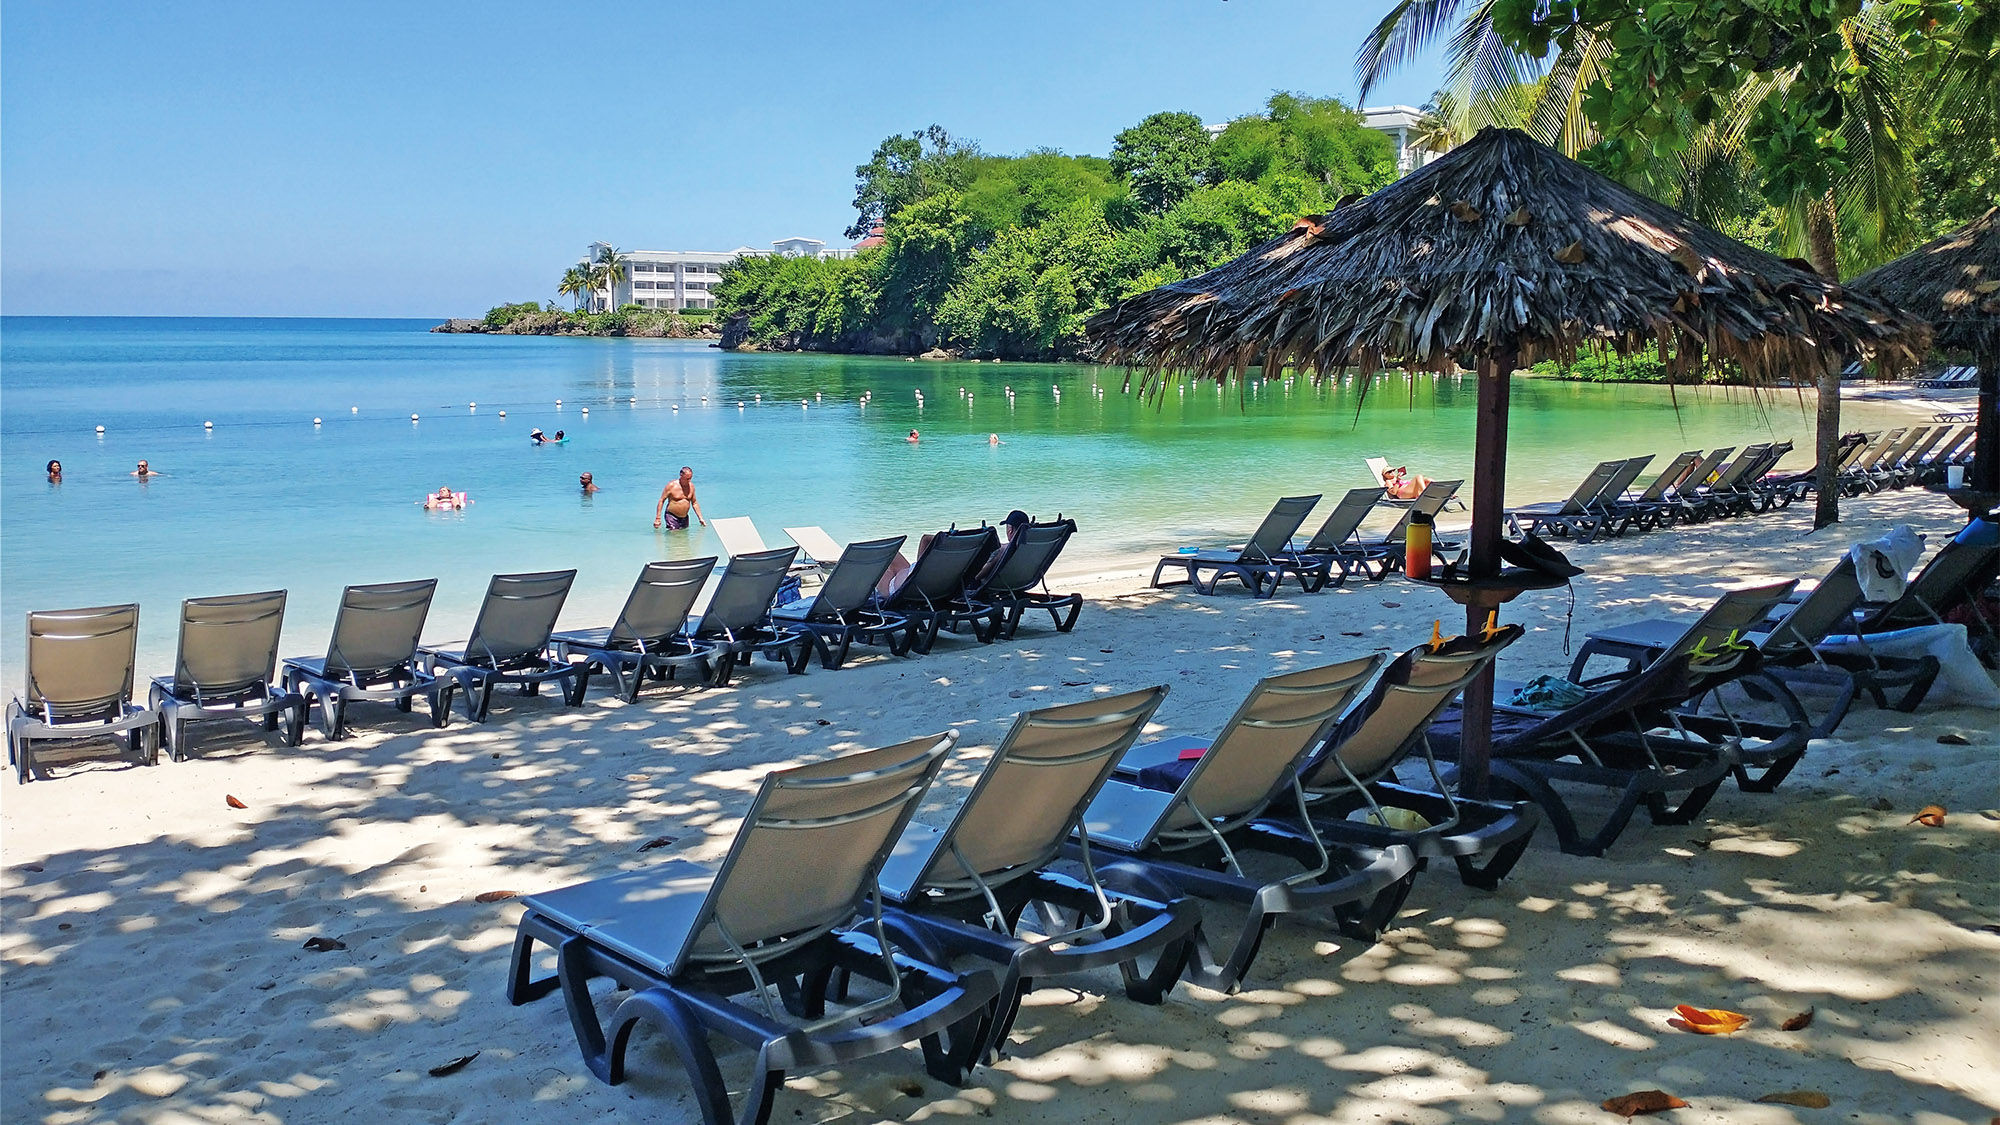 The resort's Sunset Cove beach offers guests a secluded, verdant experience.